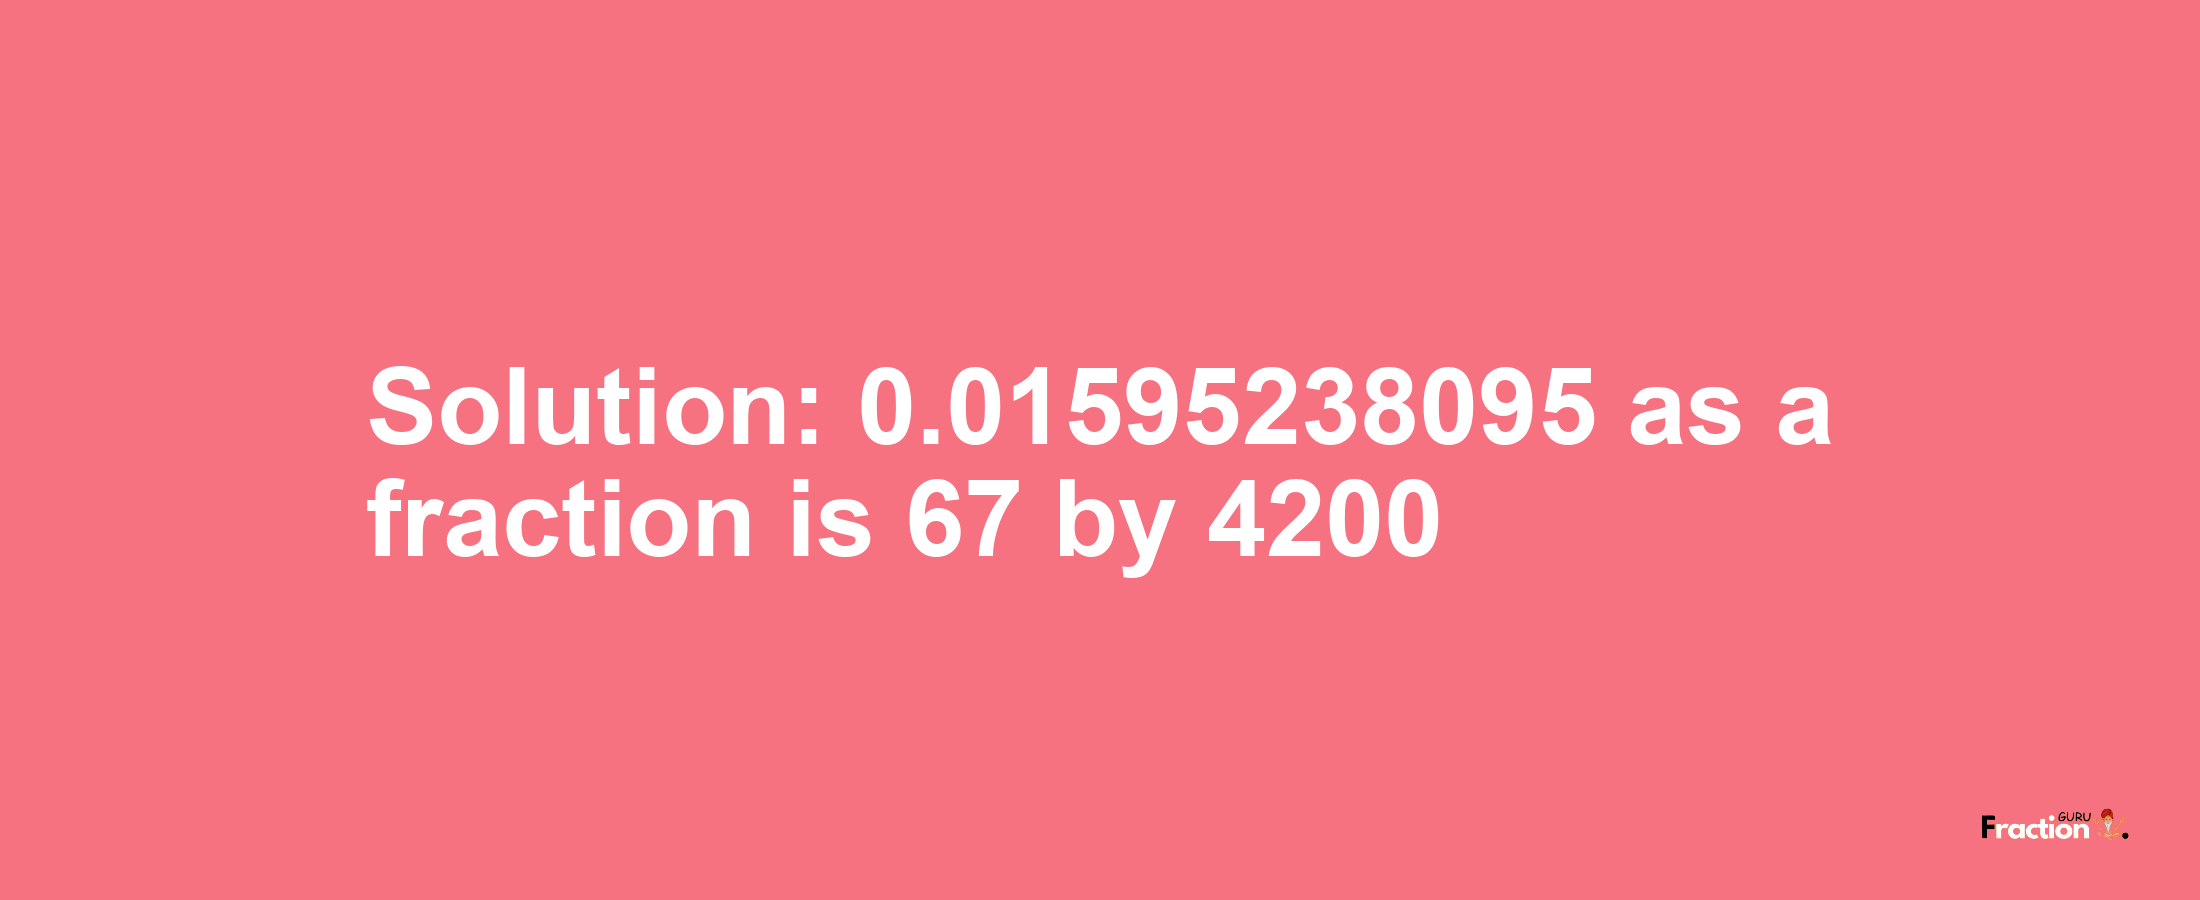 Solution:0.01595238095 as a fraction is 67/4200